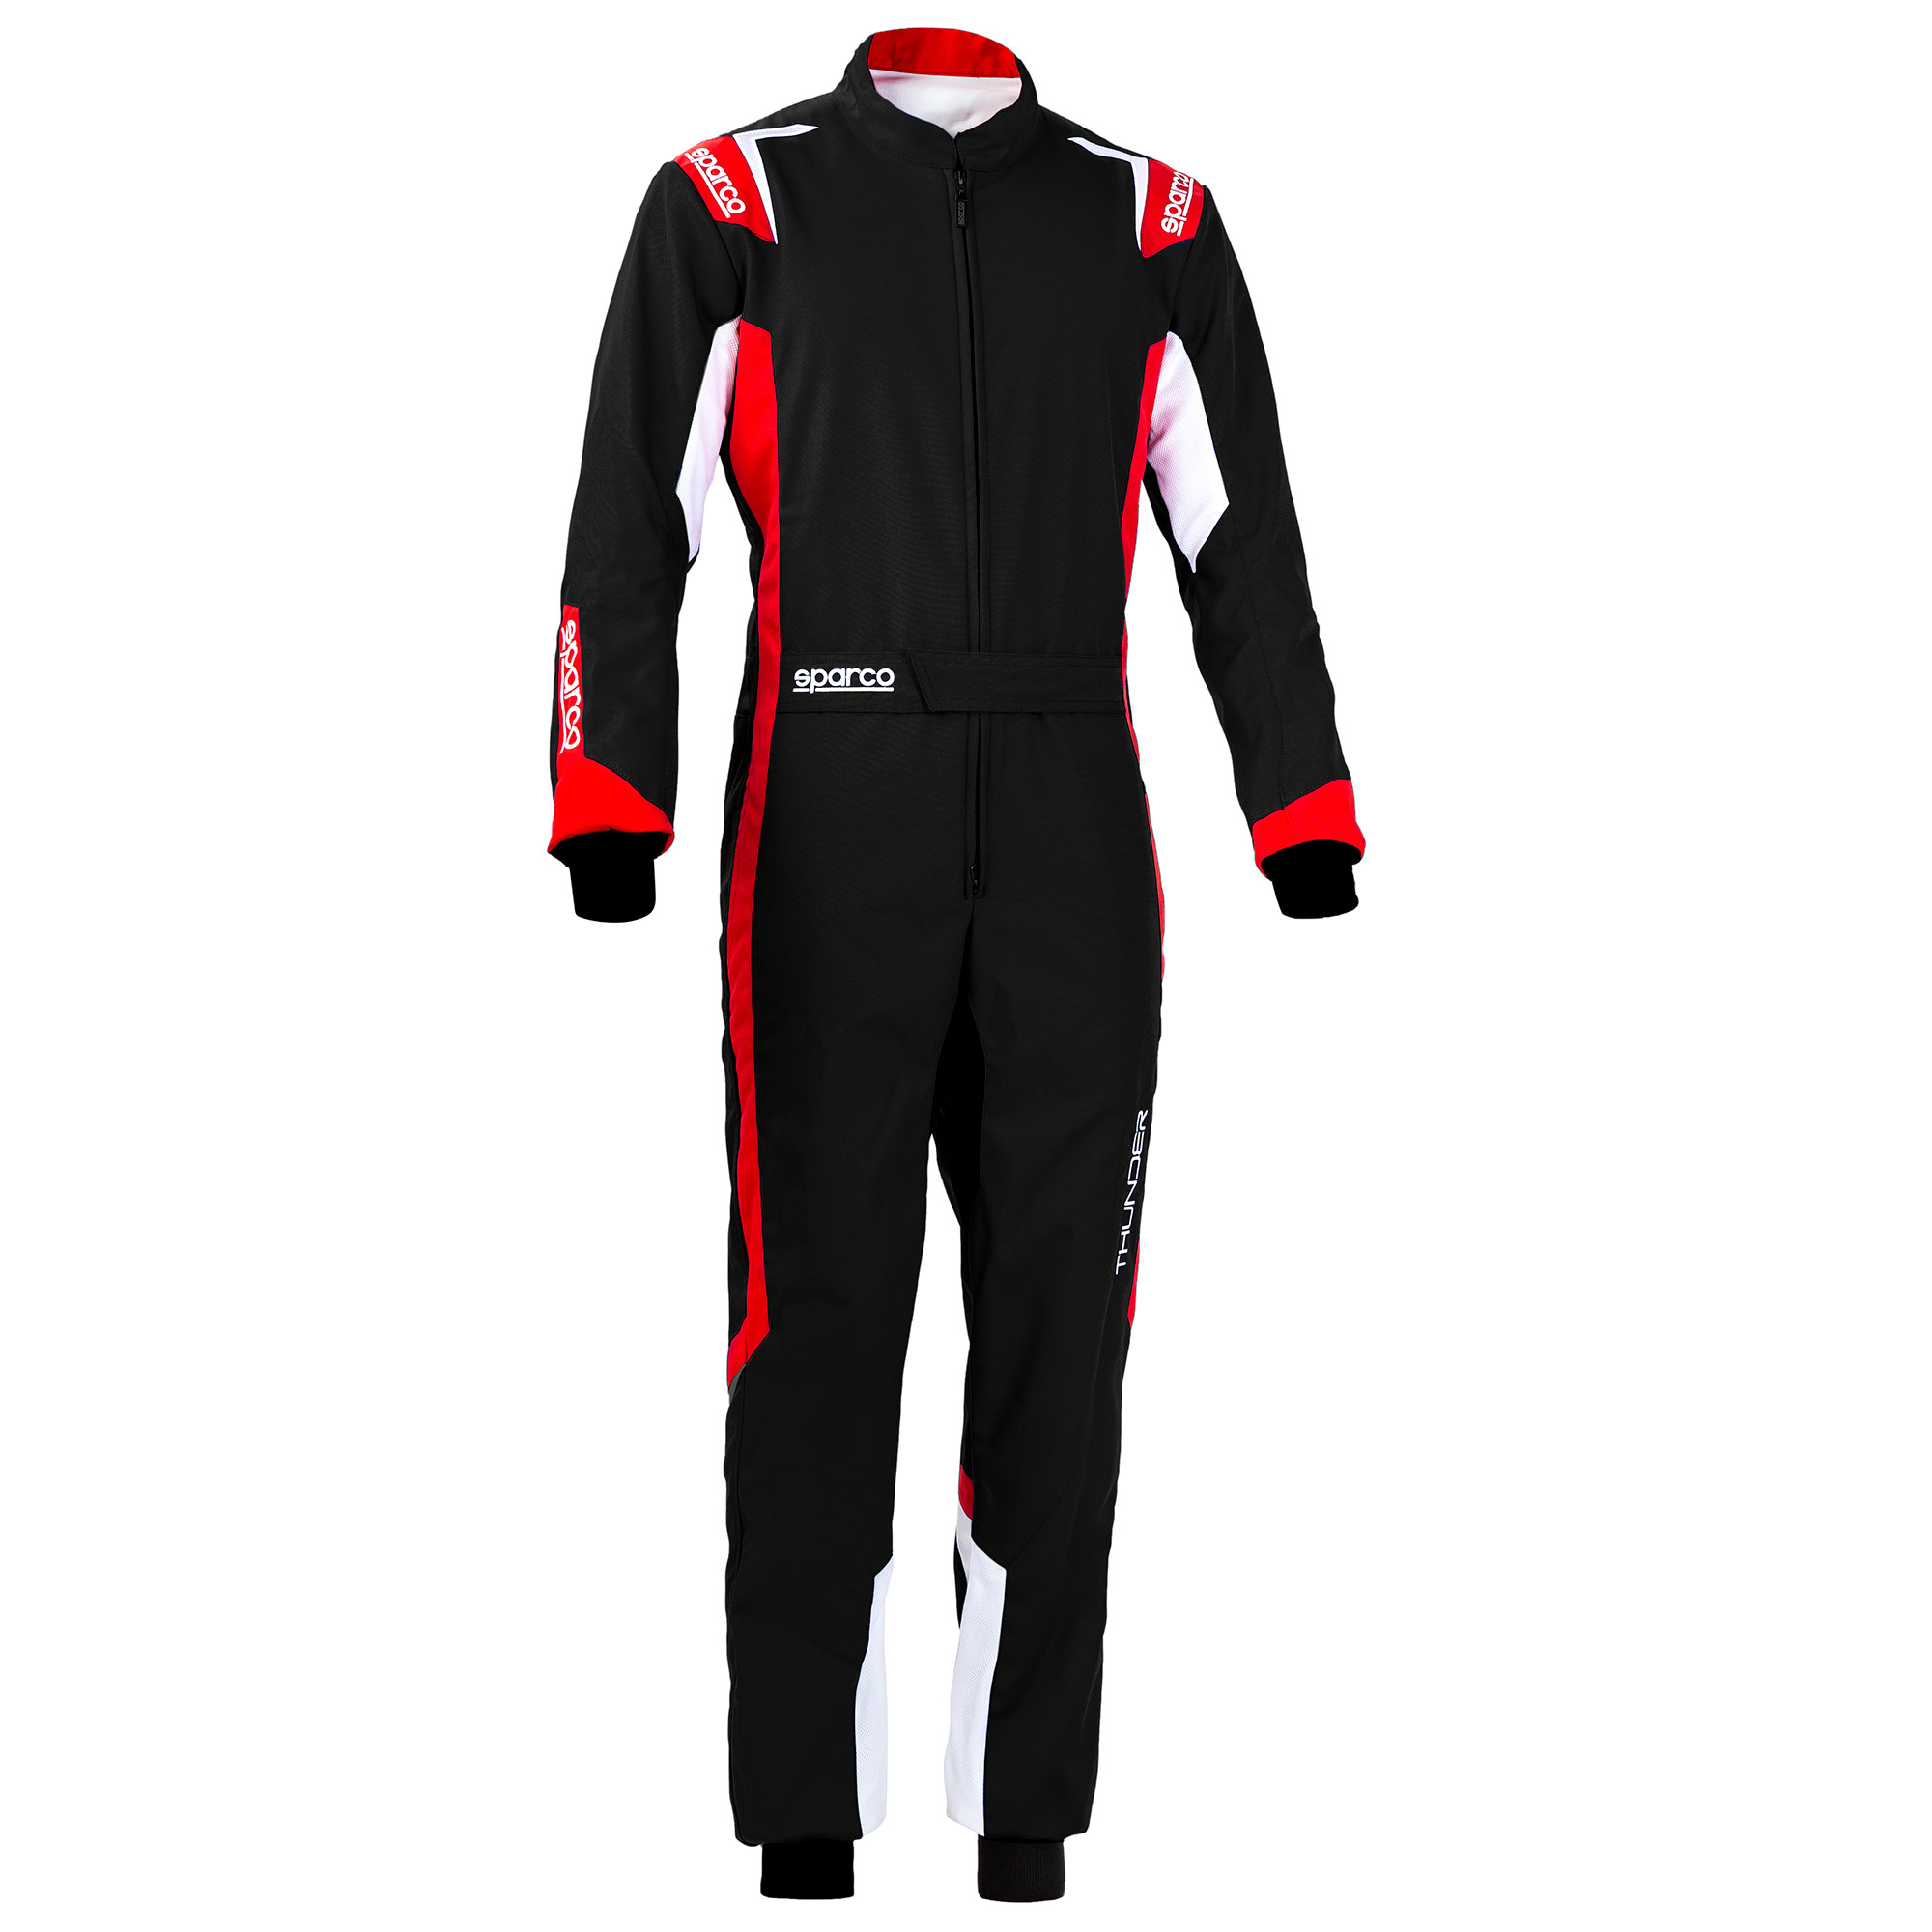 Sparco Thunder CIK FIA Level 2 Approved Karting Suit - Adult & Kids Sizes